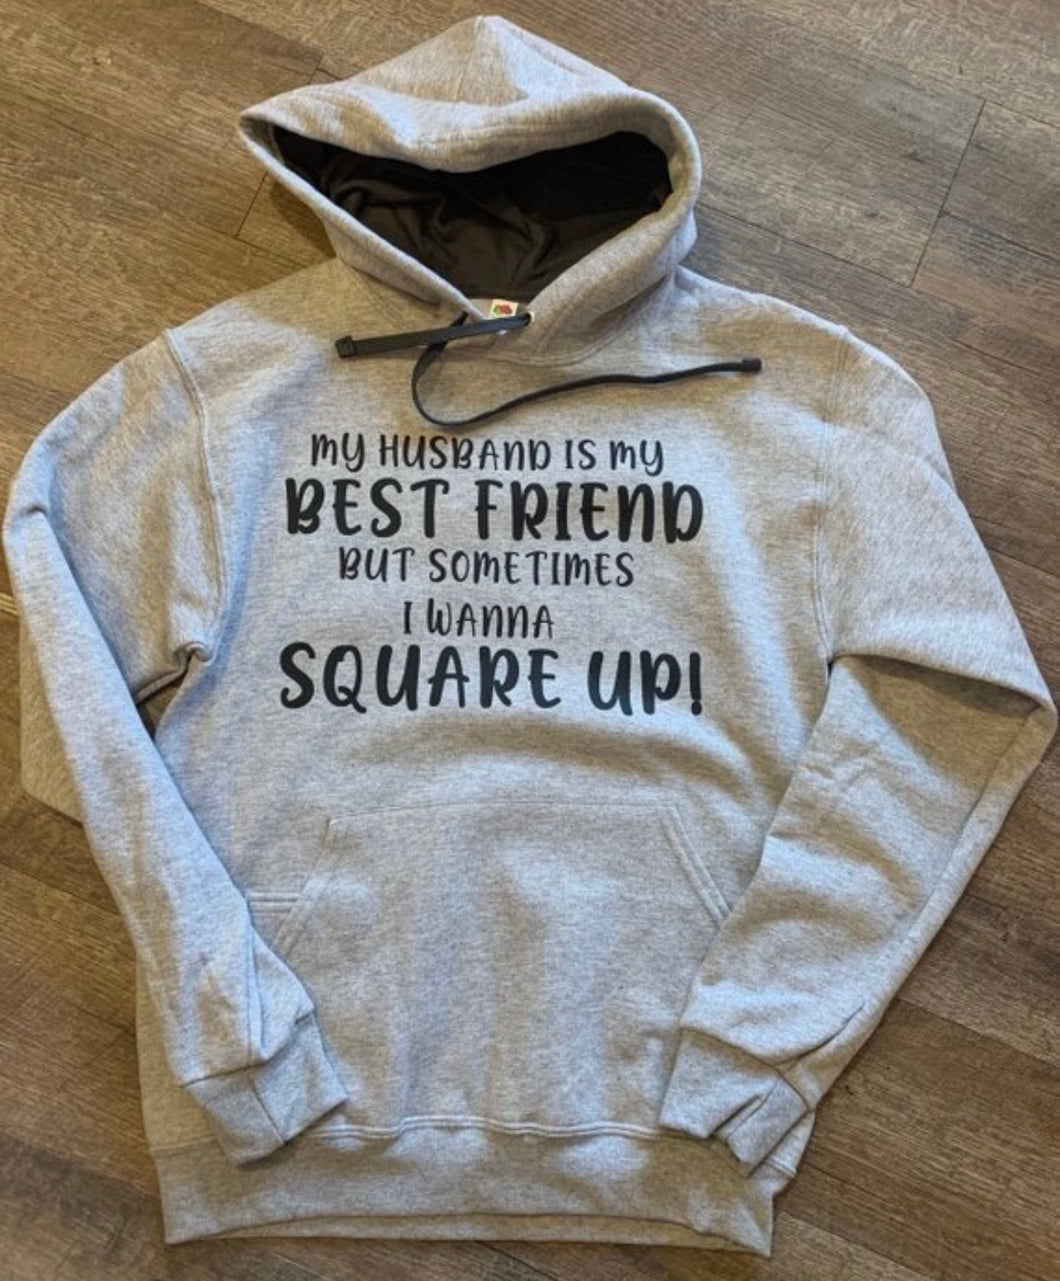 My husband is my best friend but sometimes i want to square up. Funny womens graphic hoodie. Gift for wife. - Mavictoria Designs Hot Press Express